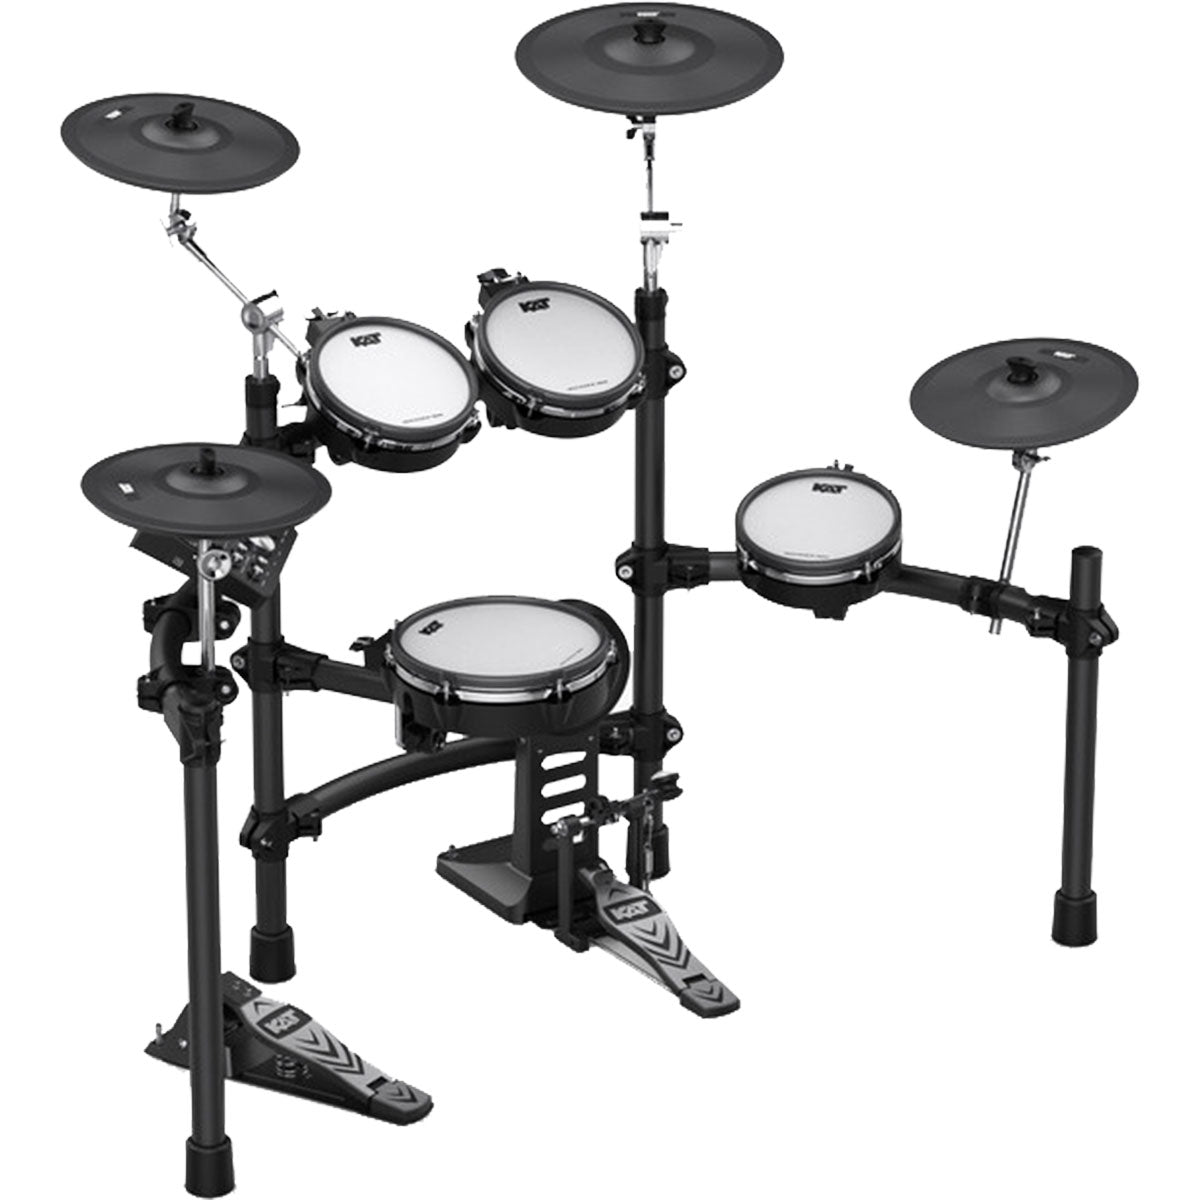 3/4 view of Kat Percussion KT-300 Electronic Drum Set w/Remo Mesh Heads showing back, top and right side